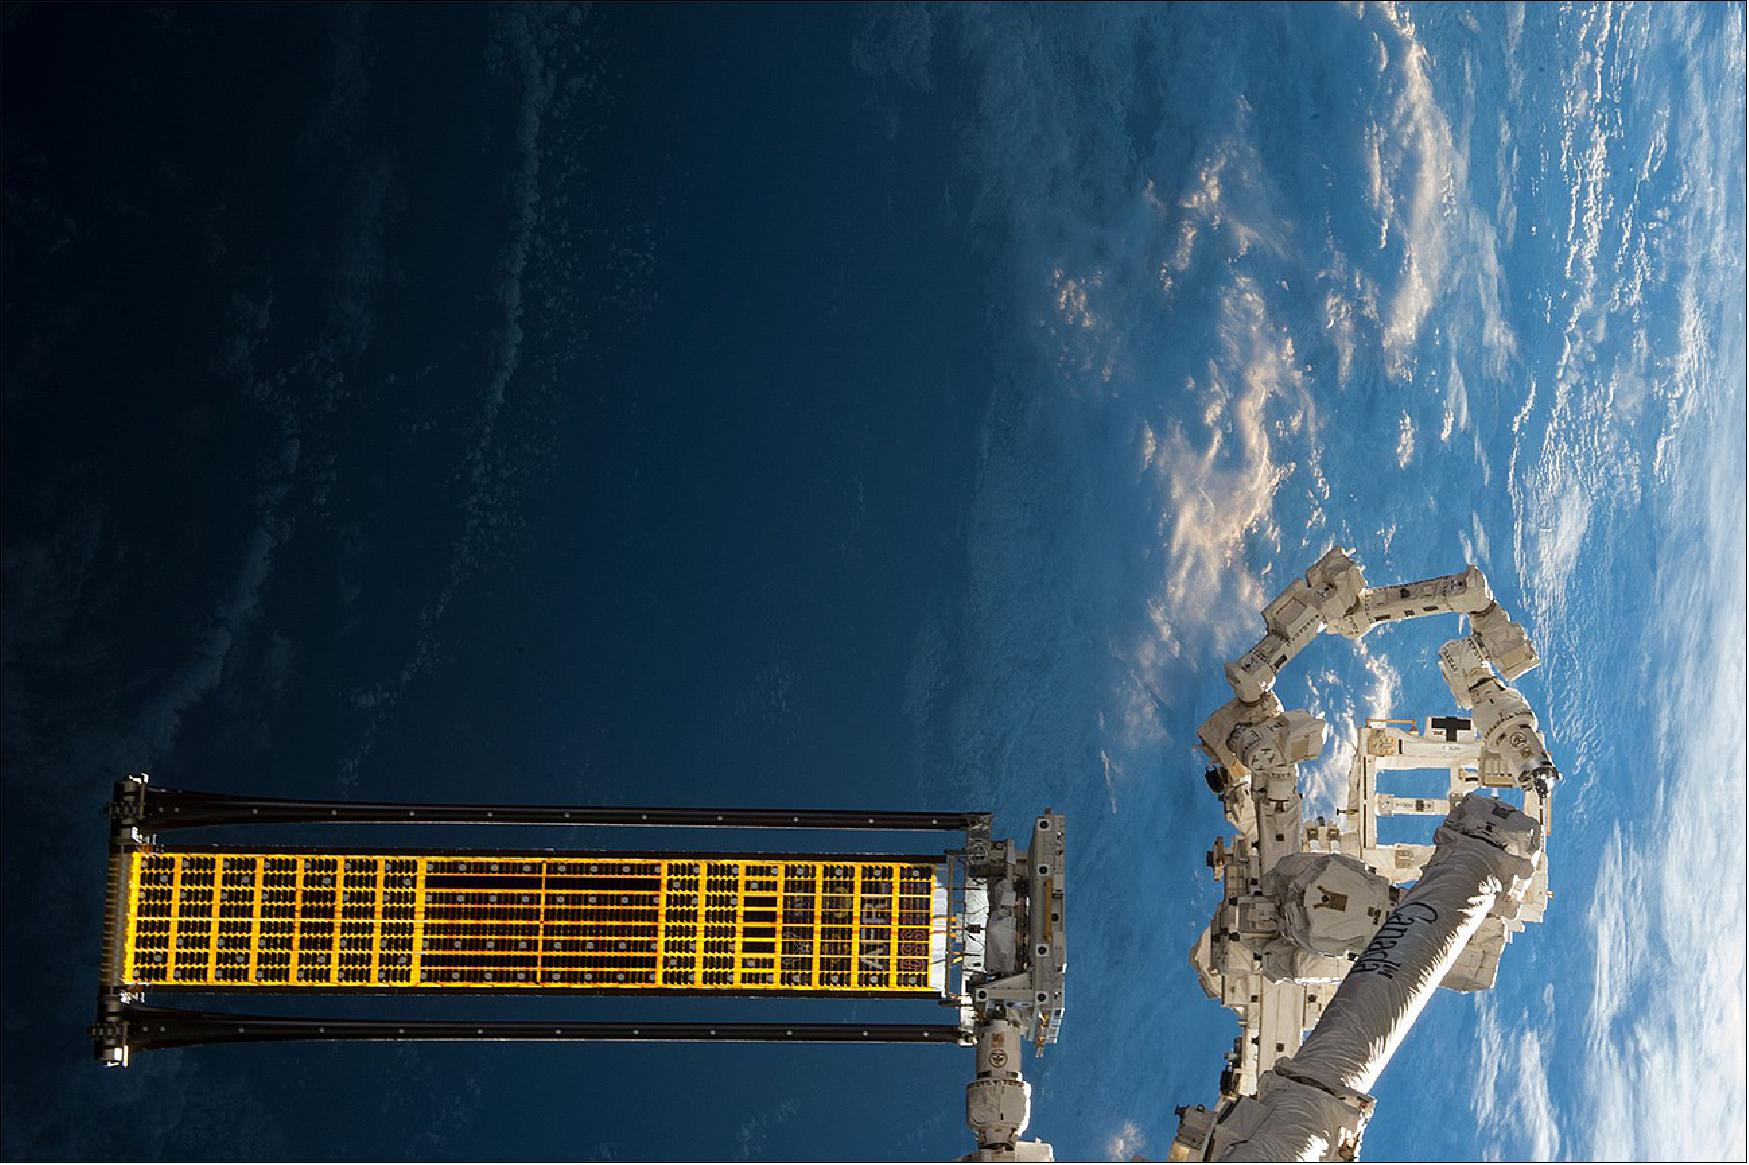 Figure 8: AFRL's ROSA (Roll-Out Solar Array) developed in partnership with Deployable Space Systems in flight-testing on the International Space Station. ROSA offers scalable solar power array technology from hundreds of watts to the megawatt range (photo credit: NASA)